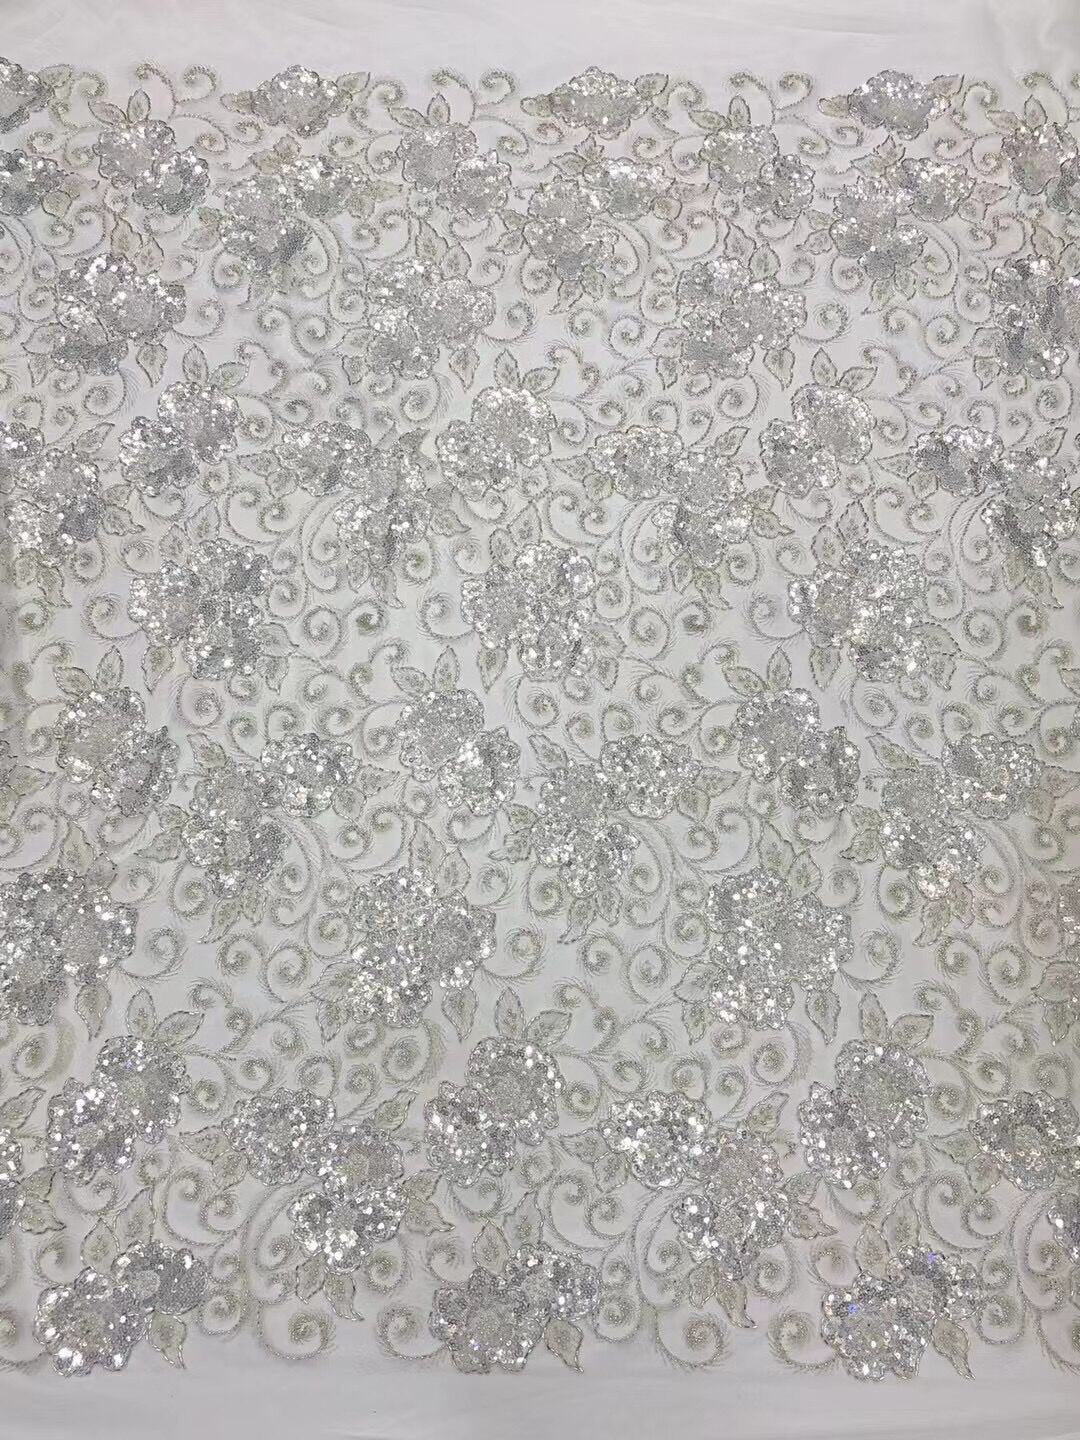 5 YARDS / 2 COLORS / Floral Beaded Embroidery Glitter Mesh Lace Wedding Party Dress Fabric - Classic & Modern